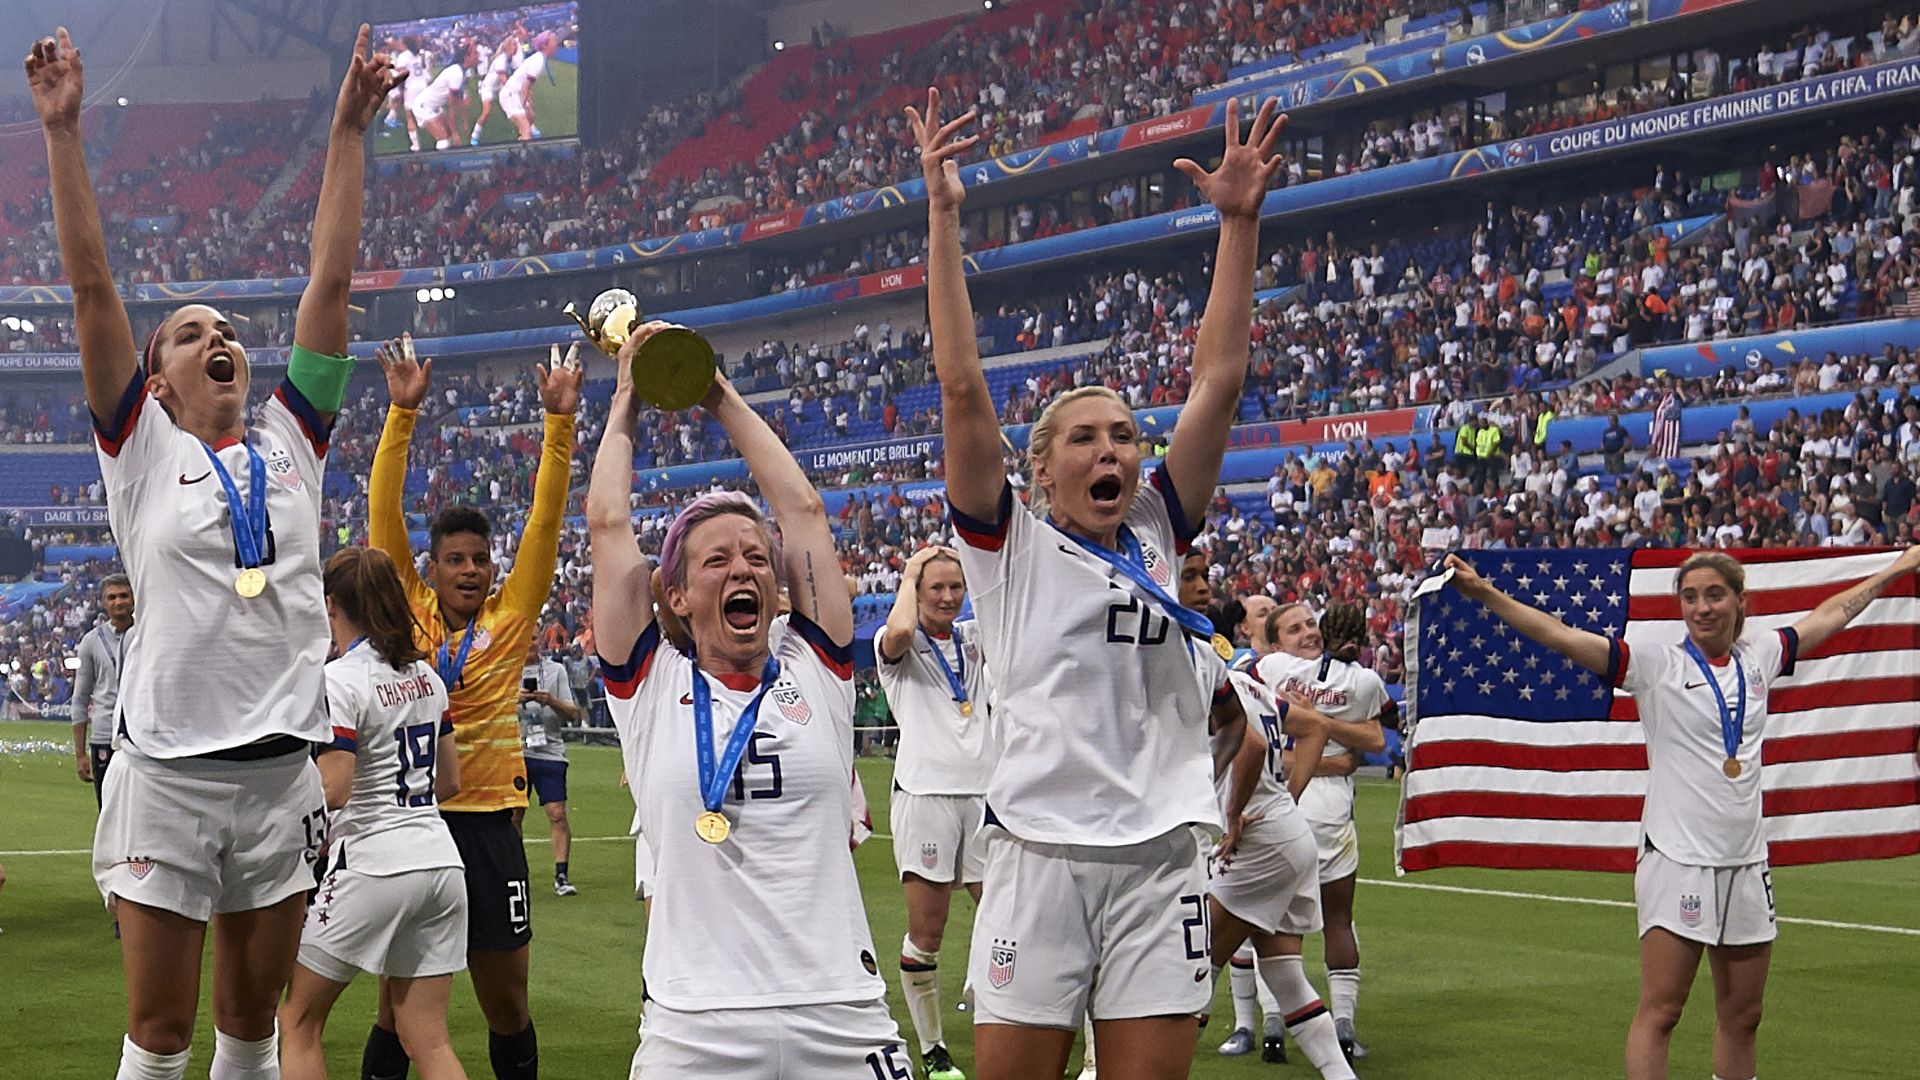  Megan Rapinoe and Alex Morgan of celebrate with their U.S. teammates after winning the 2019 FIFA Women's World Cup France Final at Stade de Lyon on July 7, 2019 in Lyon, France